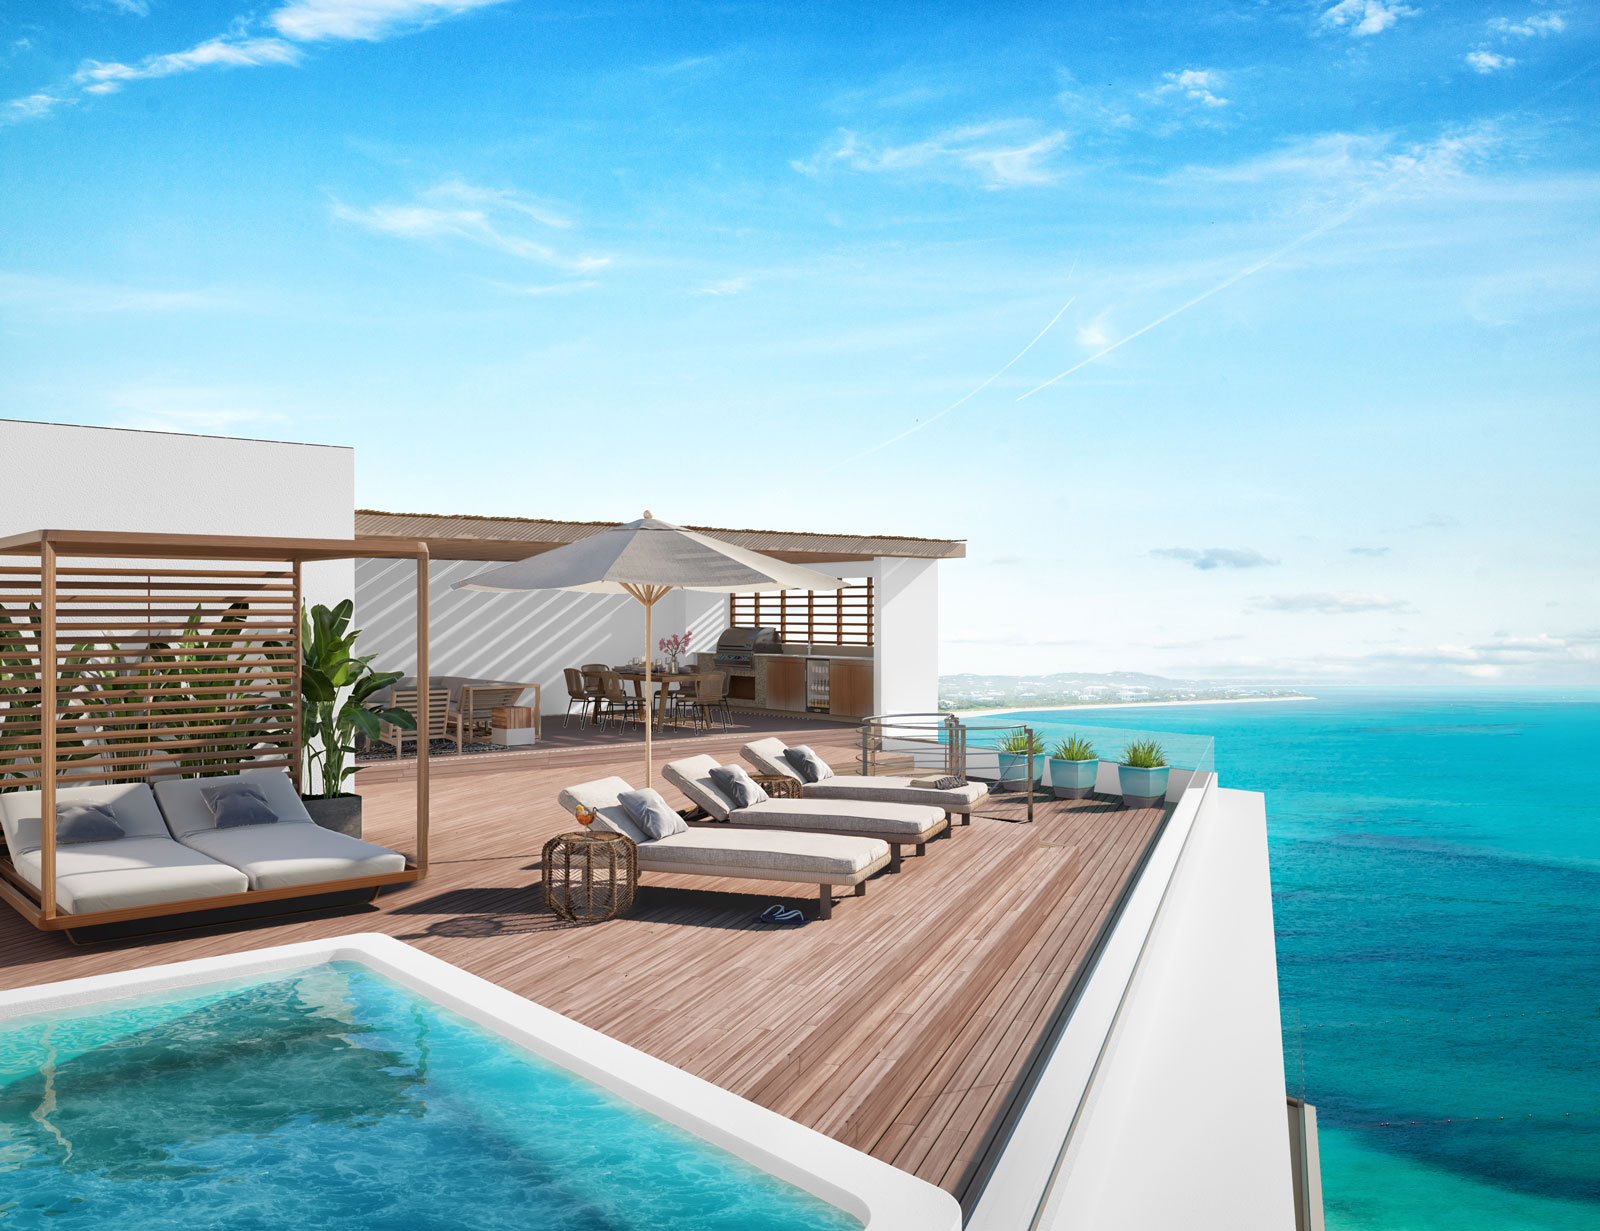 A render of a sun deck with loungers and a pool, overlooking the ocean.